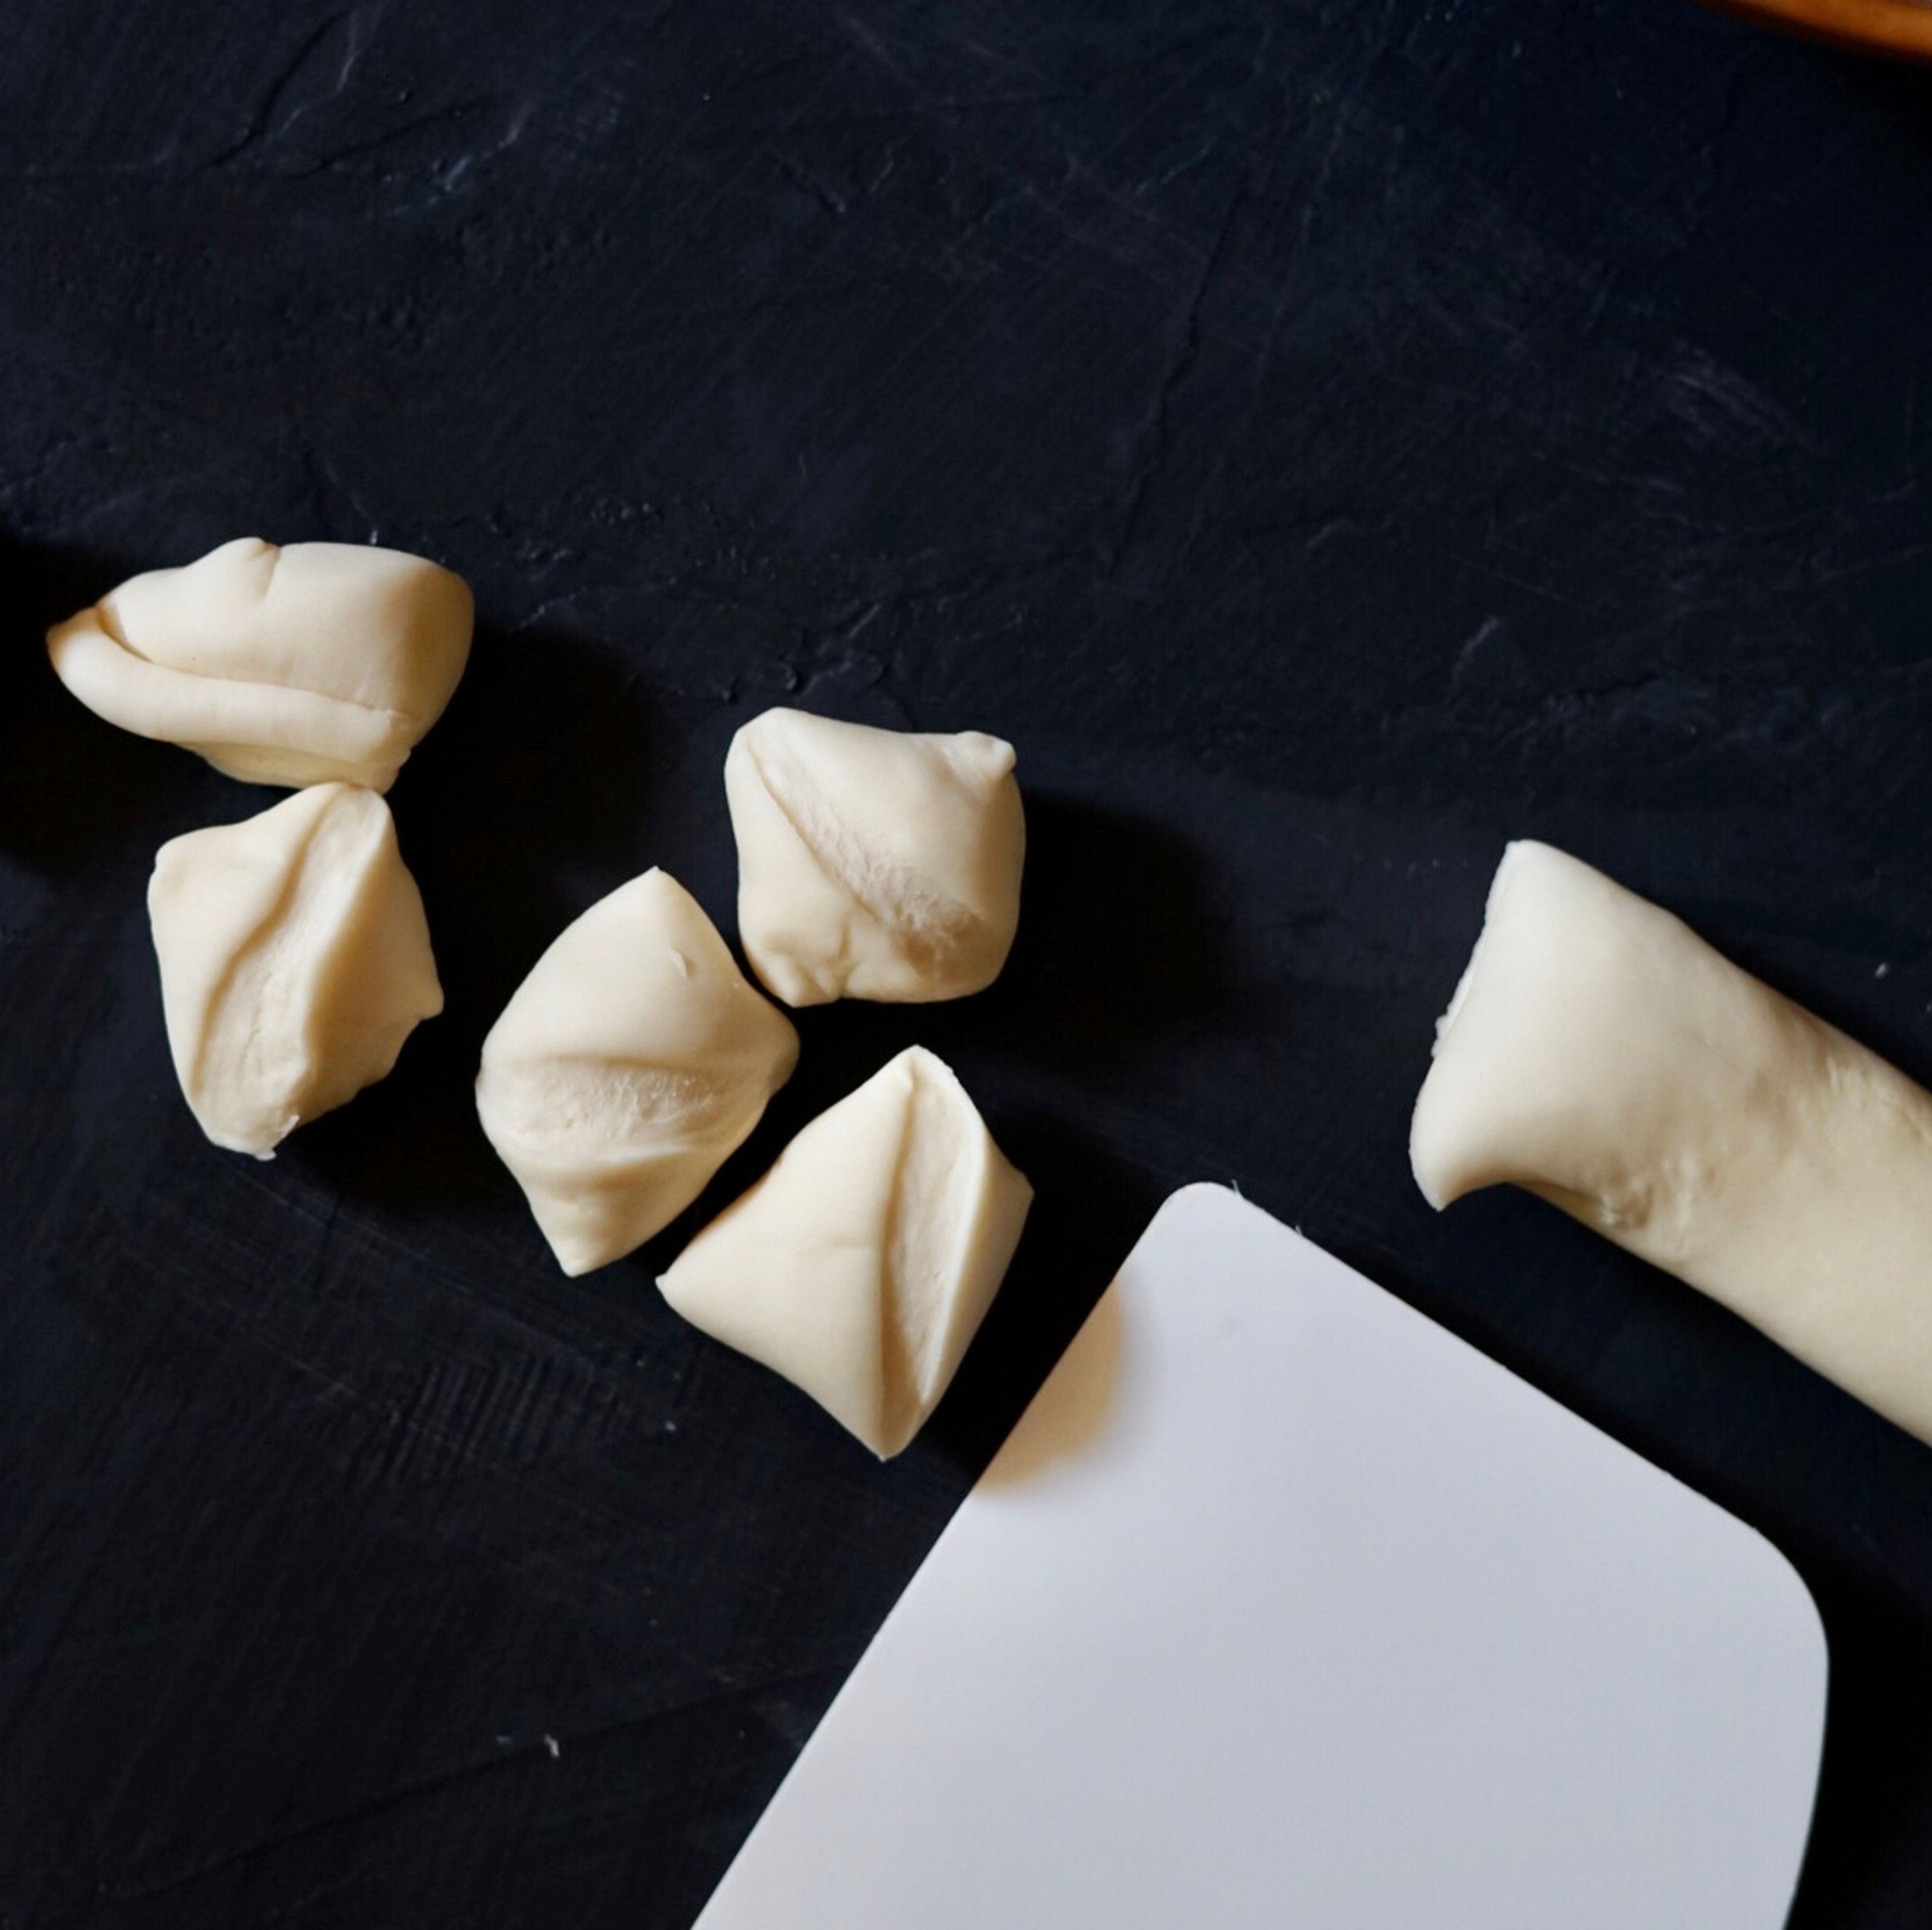 After 1 hour of resting, take out the dough and cut into small, even pieces. It should make around 50 dumplings wrappers.